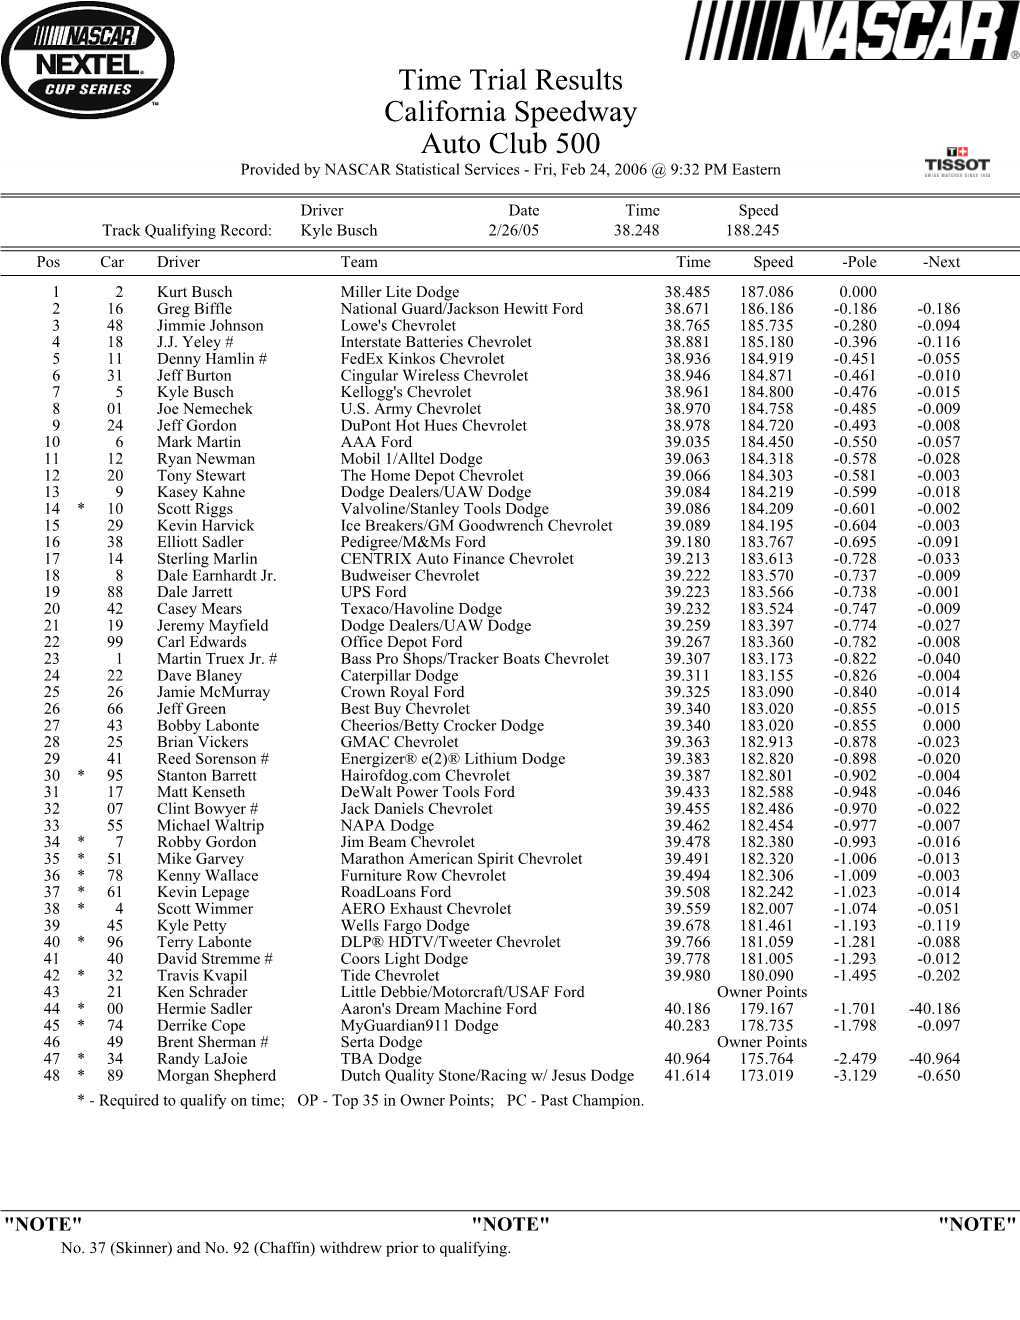 Time Trial Results California Speedway Auto Club 500 Provided by NASCAR Statistical Services - Fri, Feb 24, 2006 @ 9:32 PM Eastern